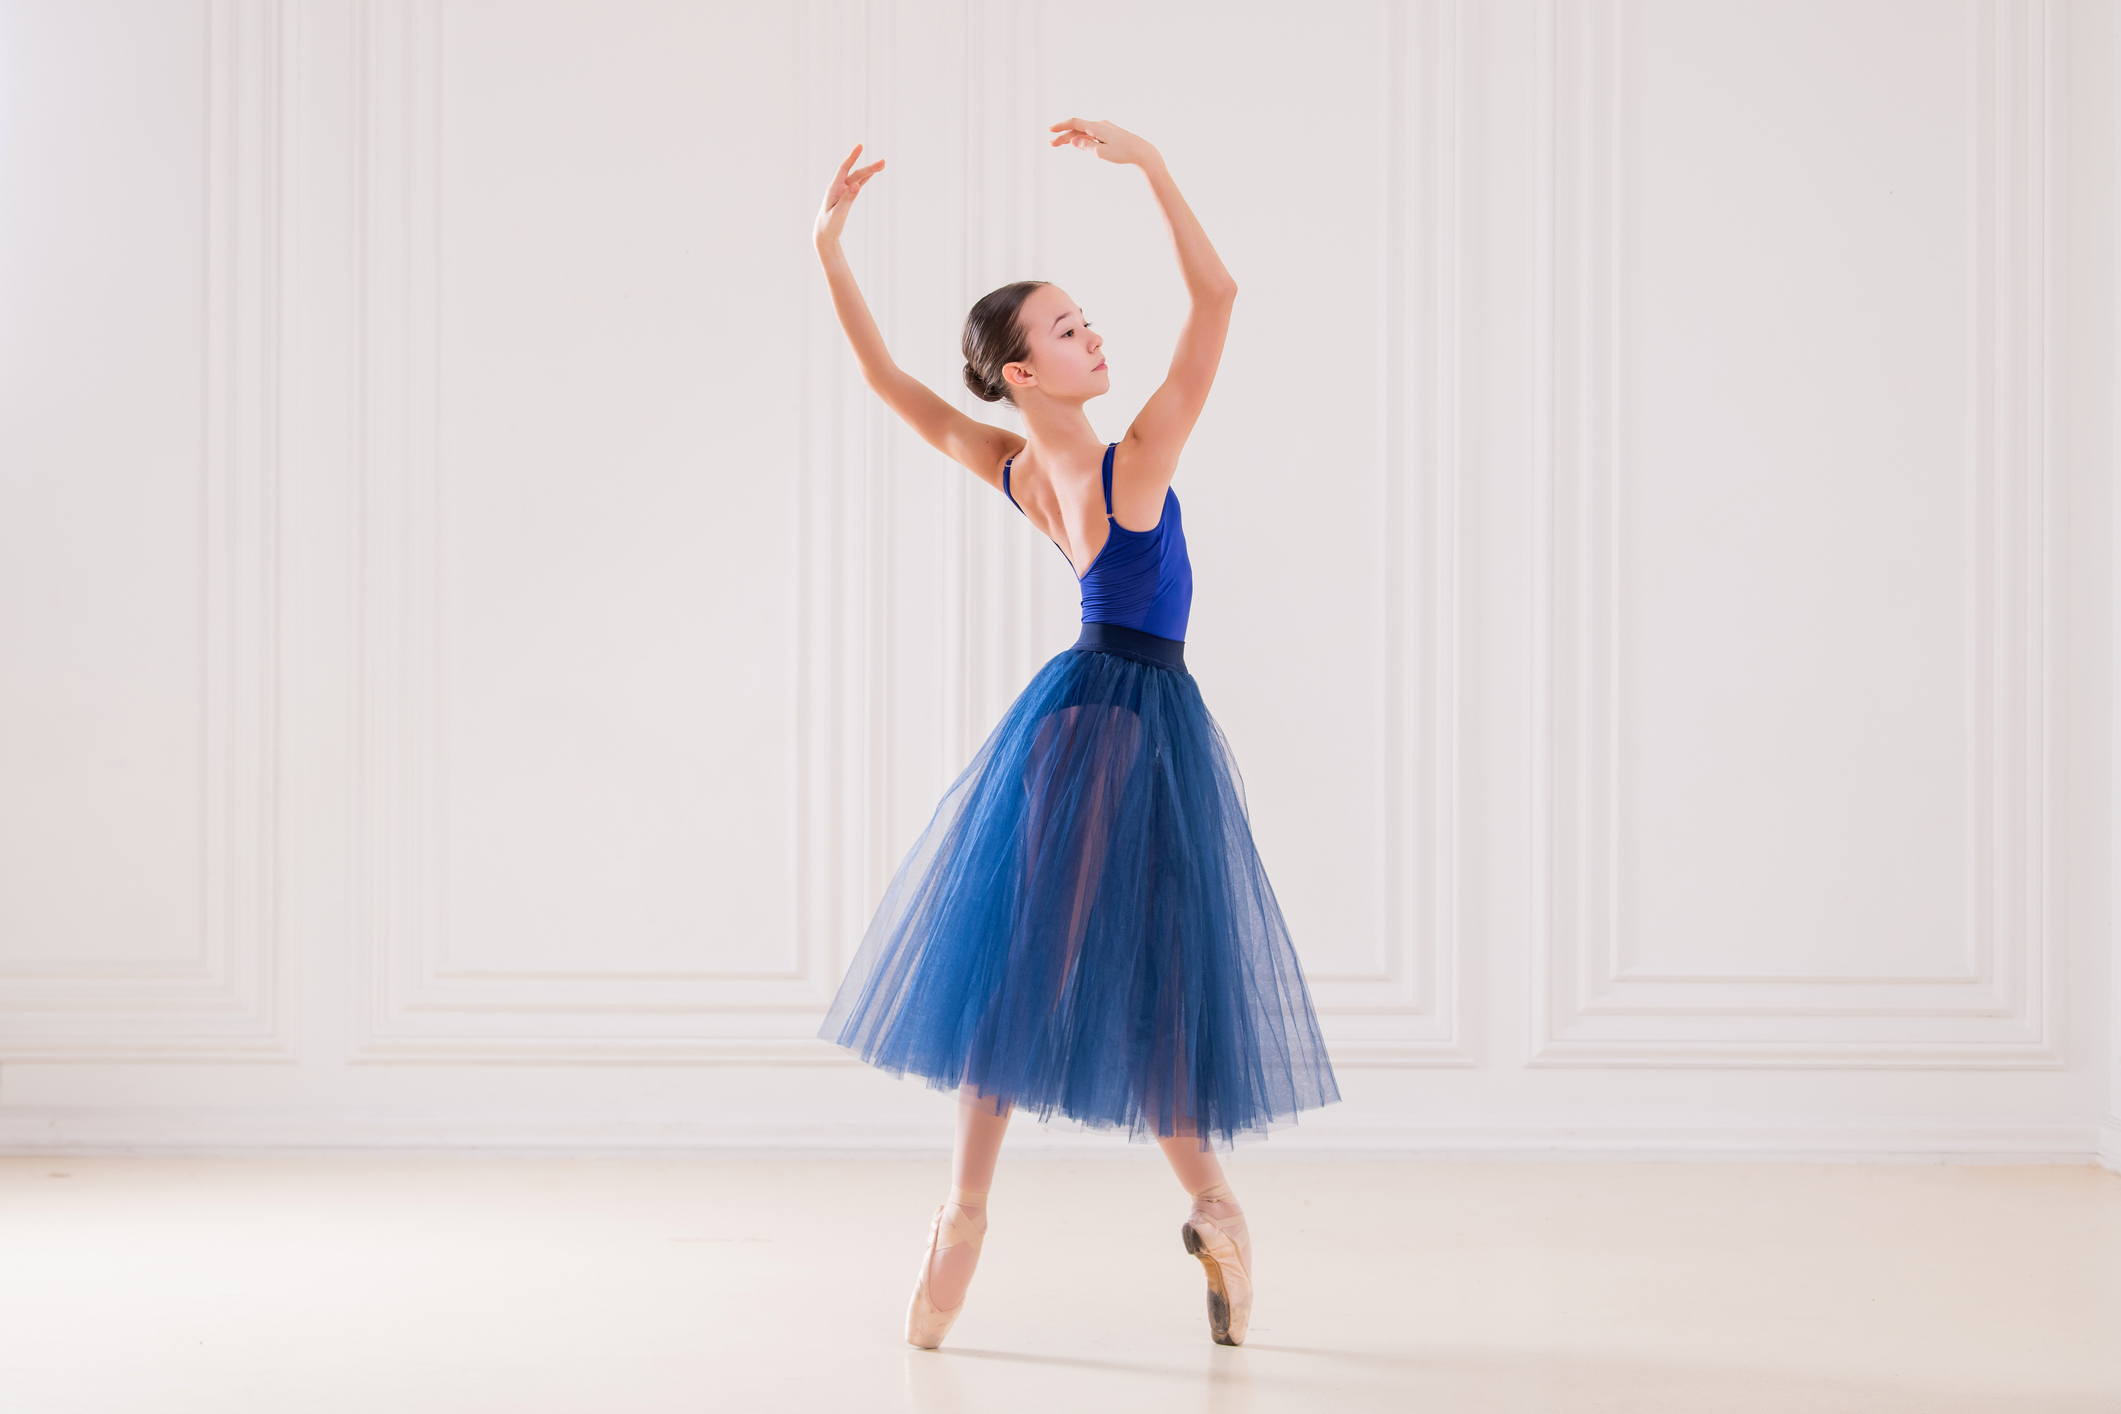 Ask Amy. A young dancer in fourth position on pointe with her arms in fifth position and her torso twisting to the left. She is wearing a blue leotard and romantic length tutu and dancing in a white-walled studio.